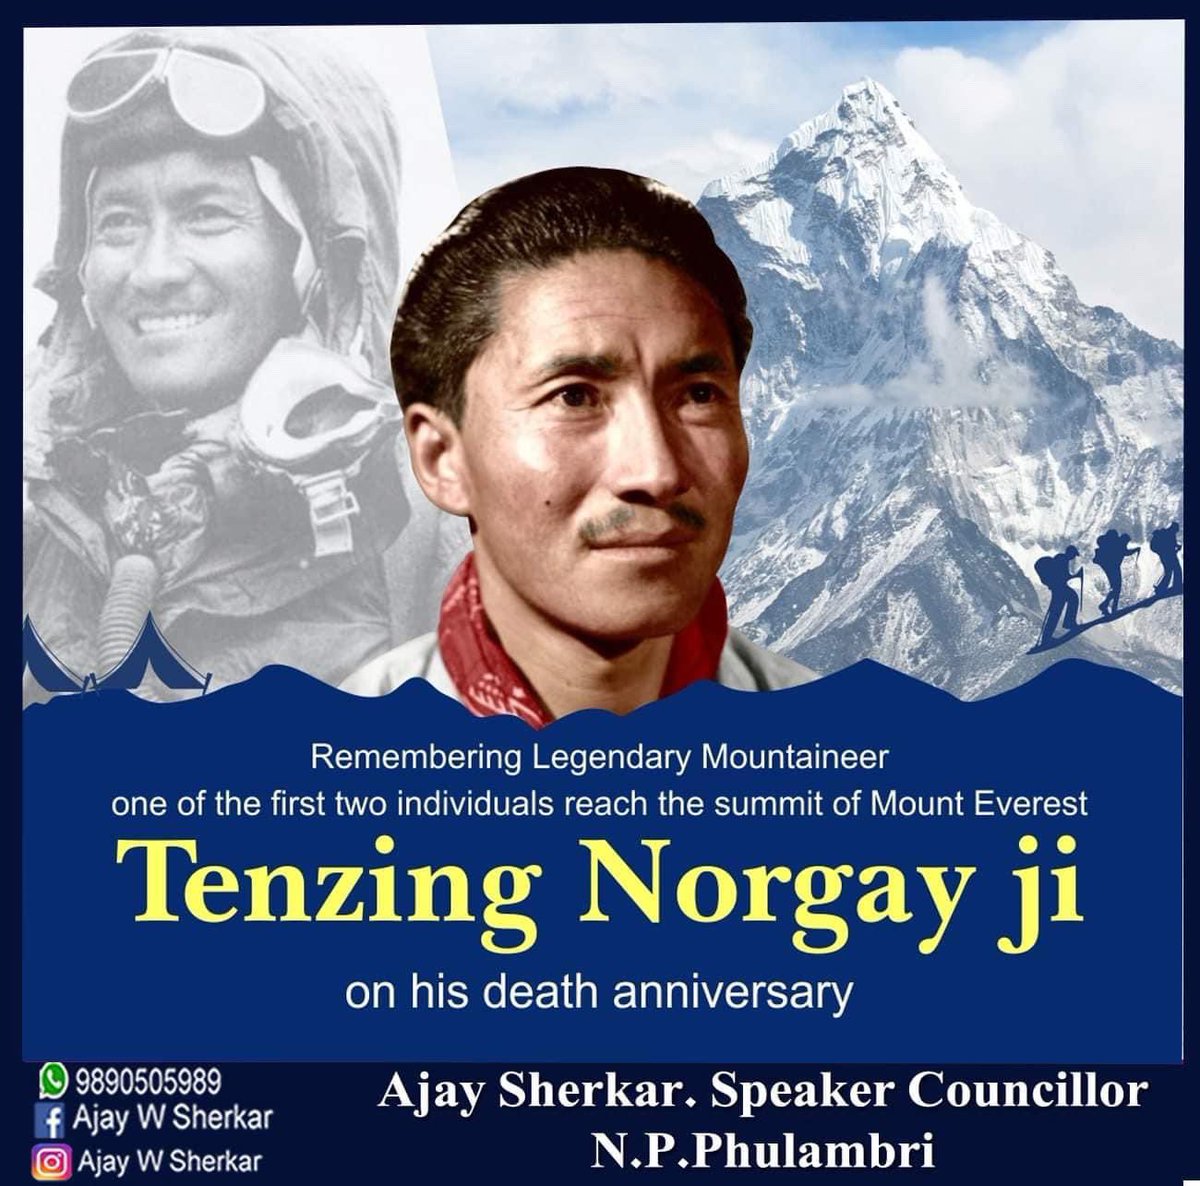 Remembering a legend of mountaineering Tenzing Norgay ji on his death anniversary.🙏🏻